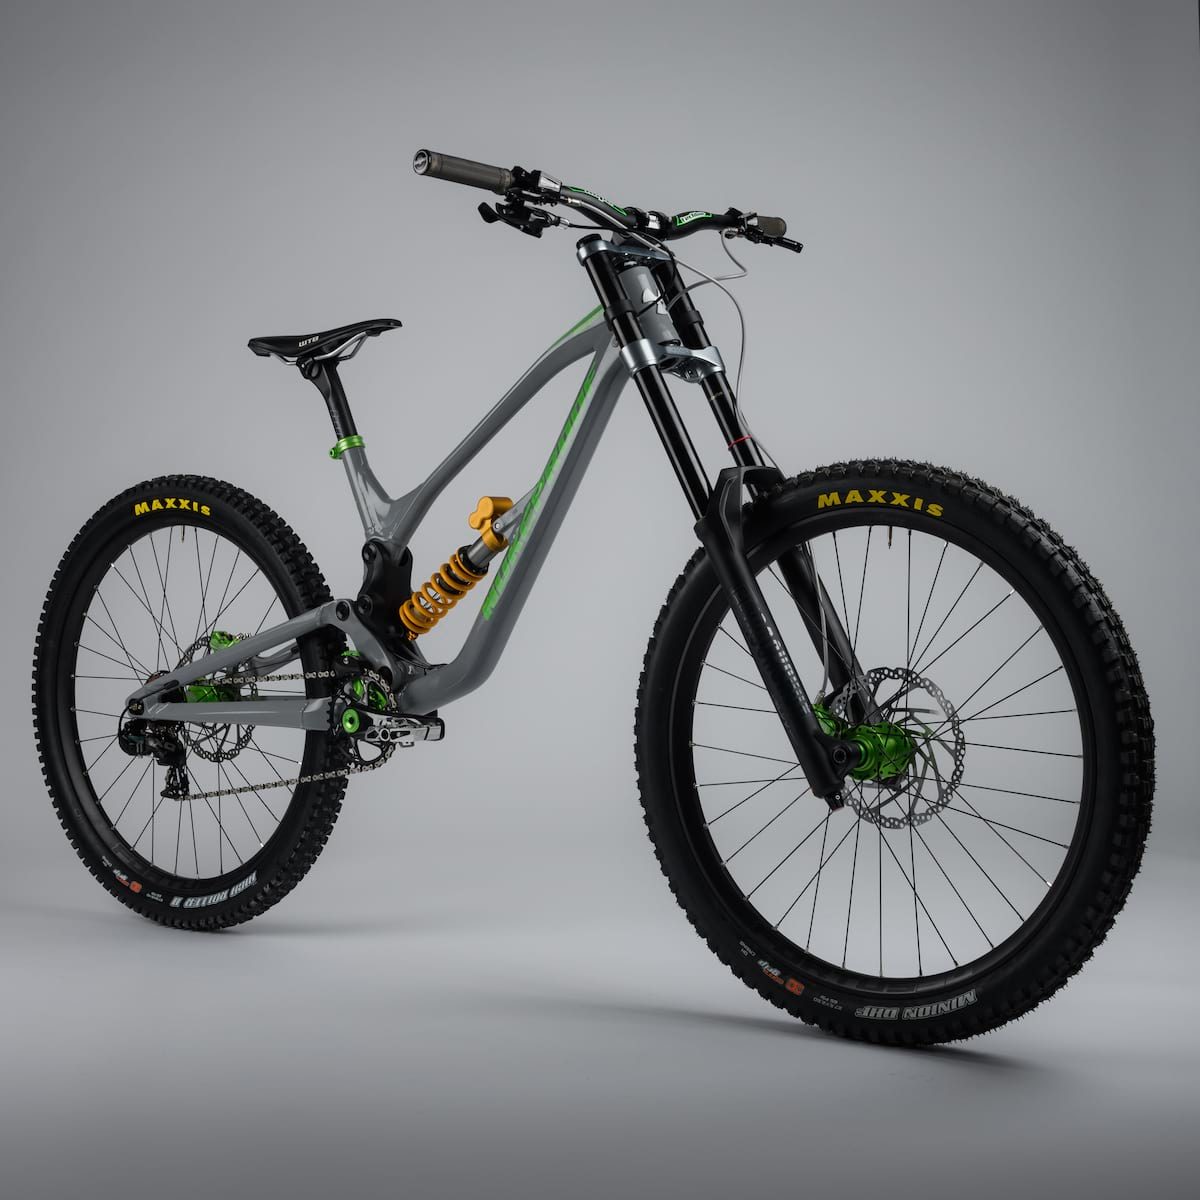 Nukeproof's new DH bike finally named. Meet the Nukeproof Dissent